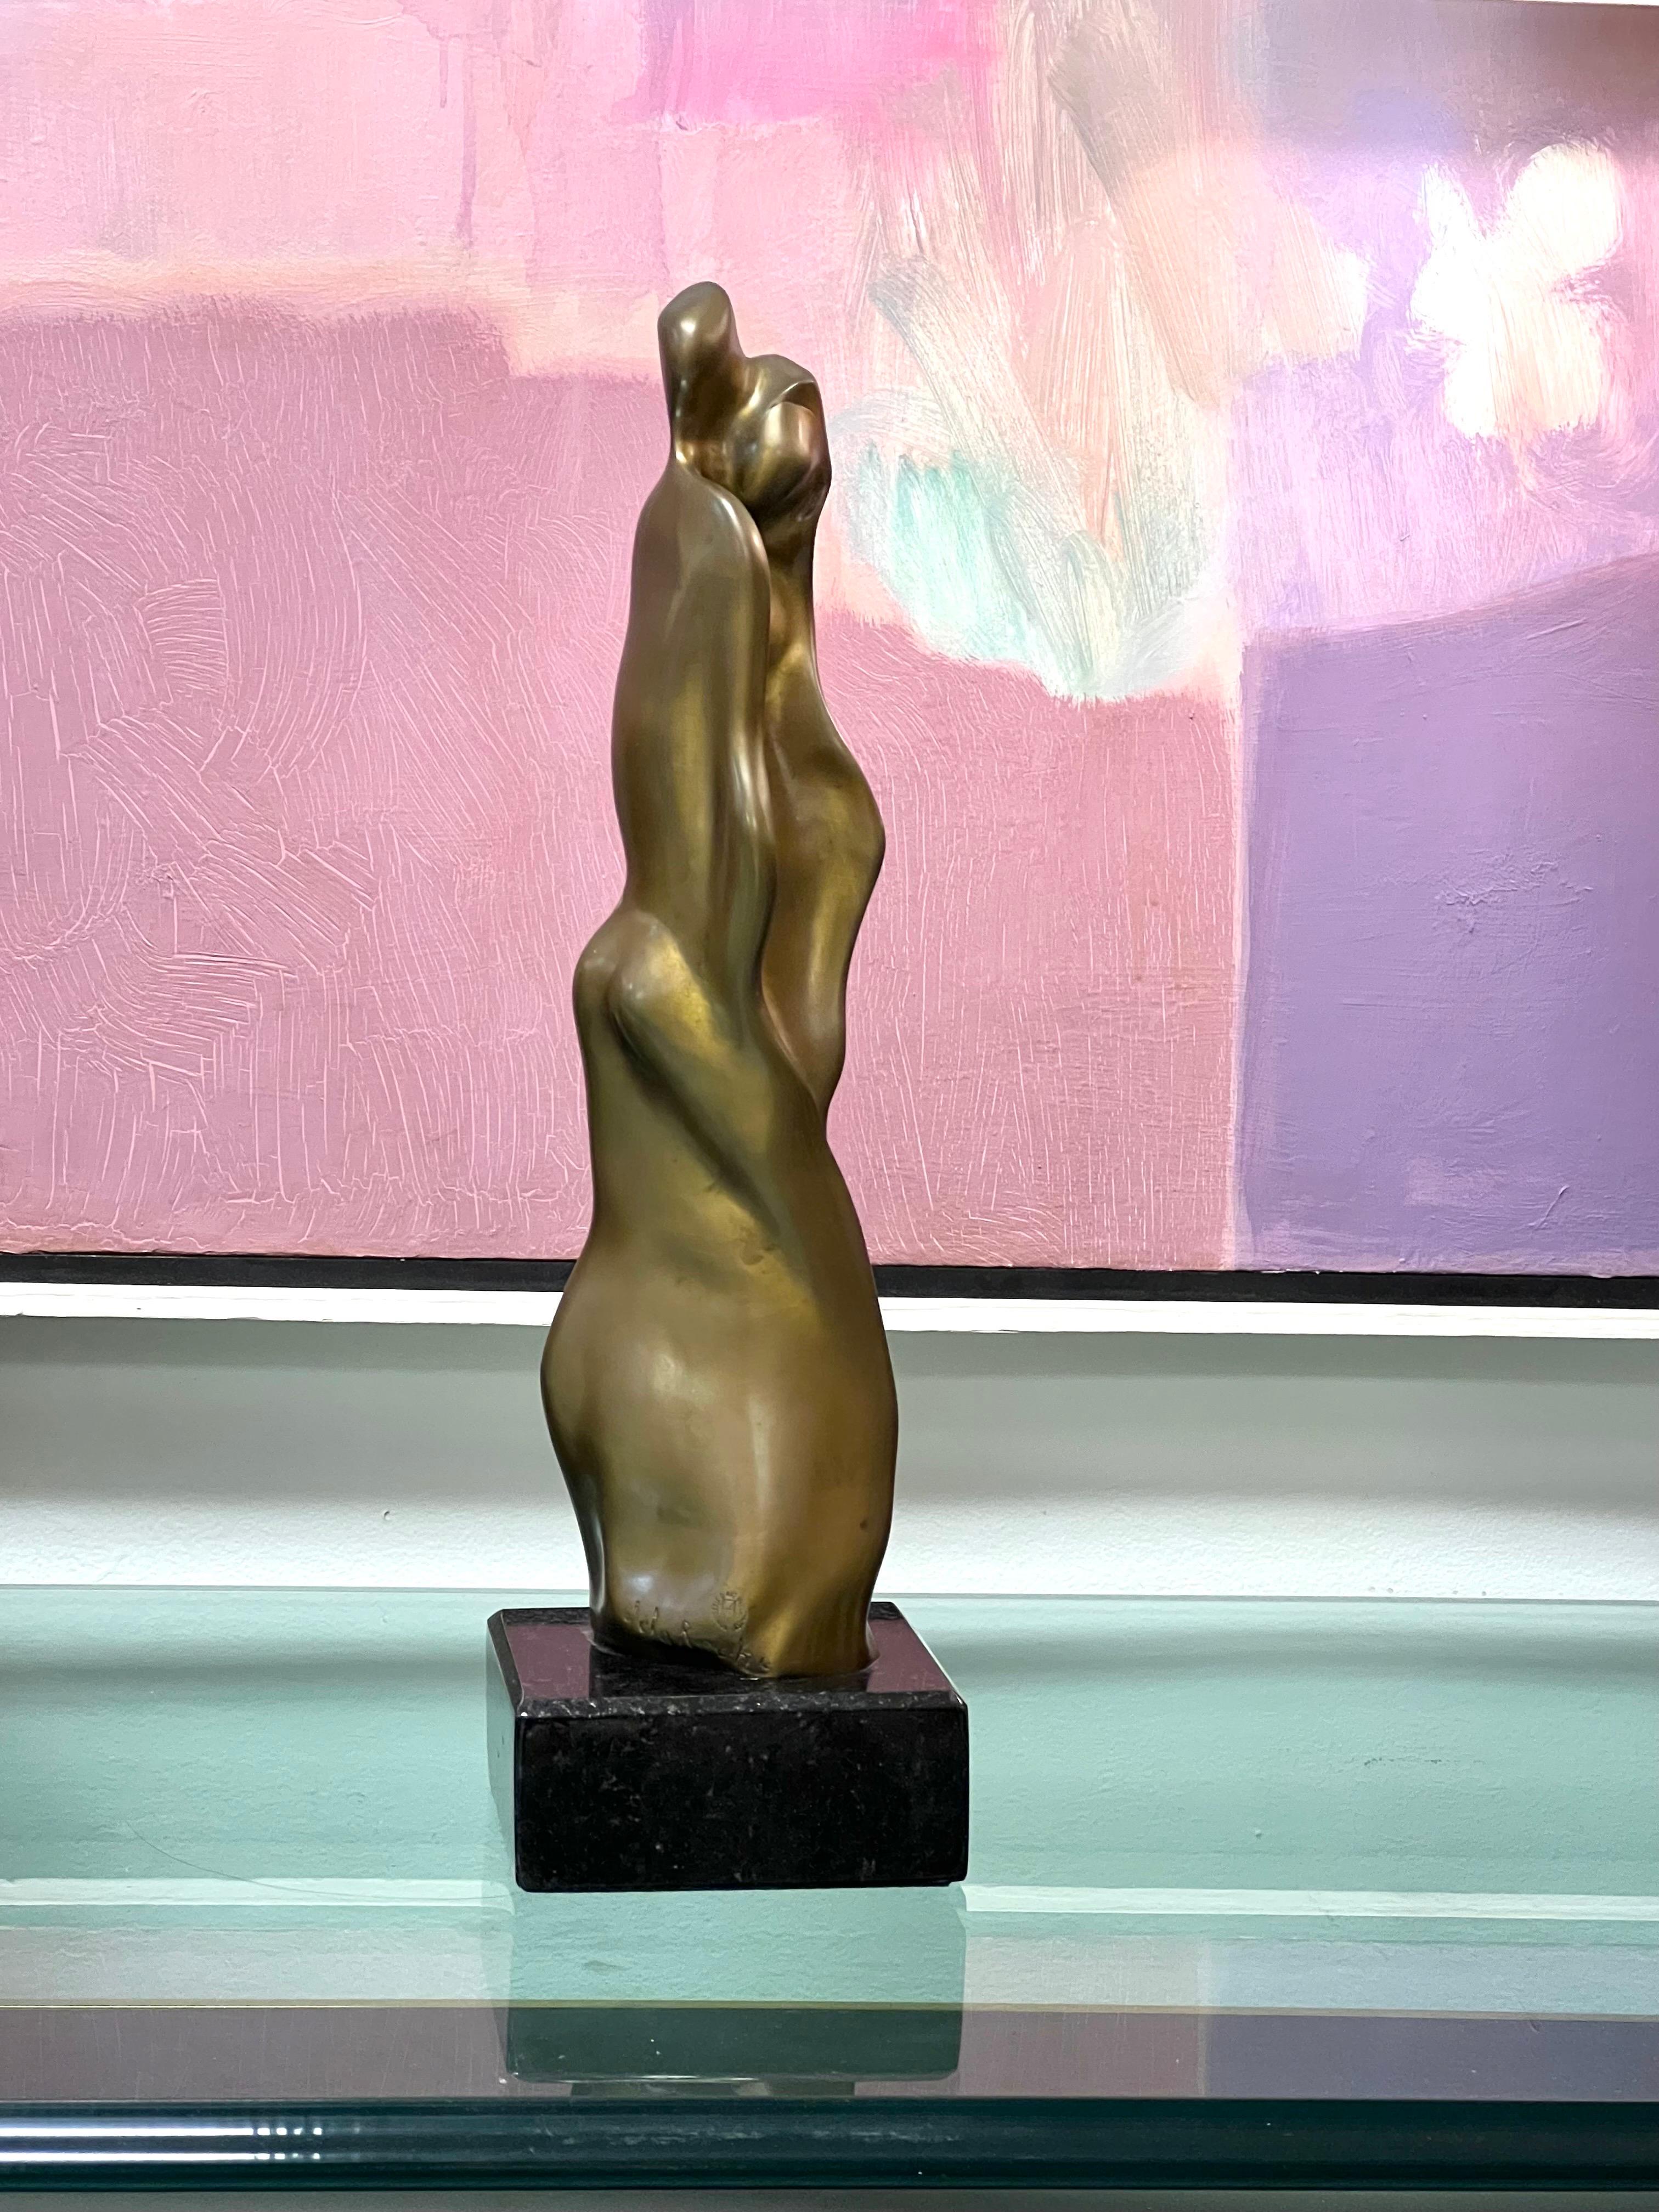 Abstract realism bronze sculpture by Canadian artist Frank De La Roche. Striking from any angle. Base is black granite.